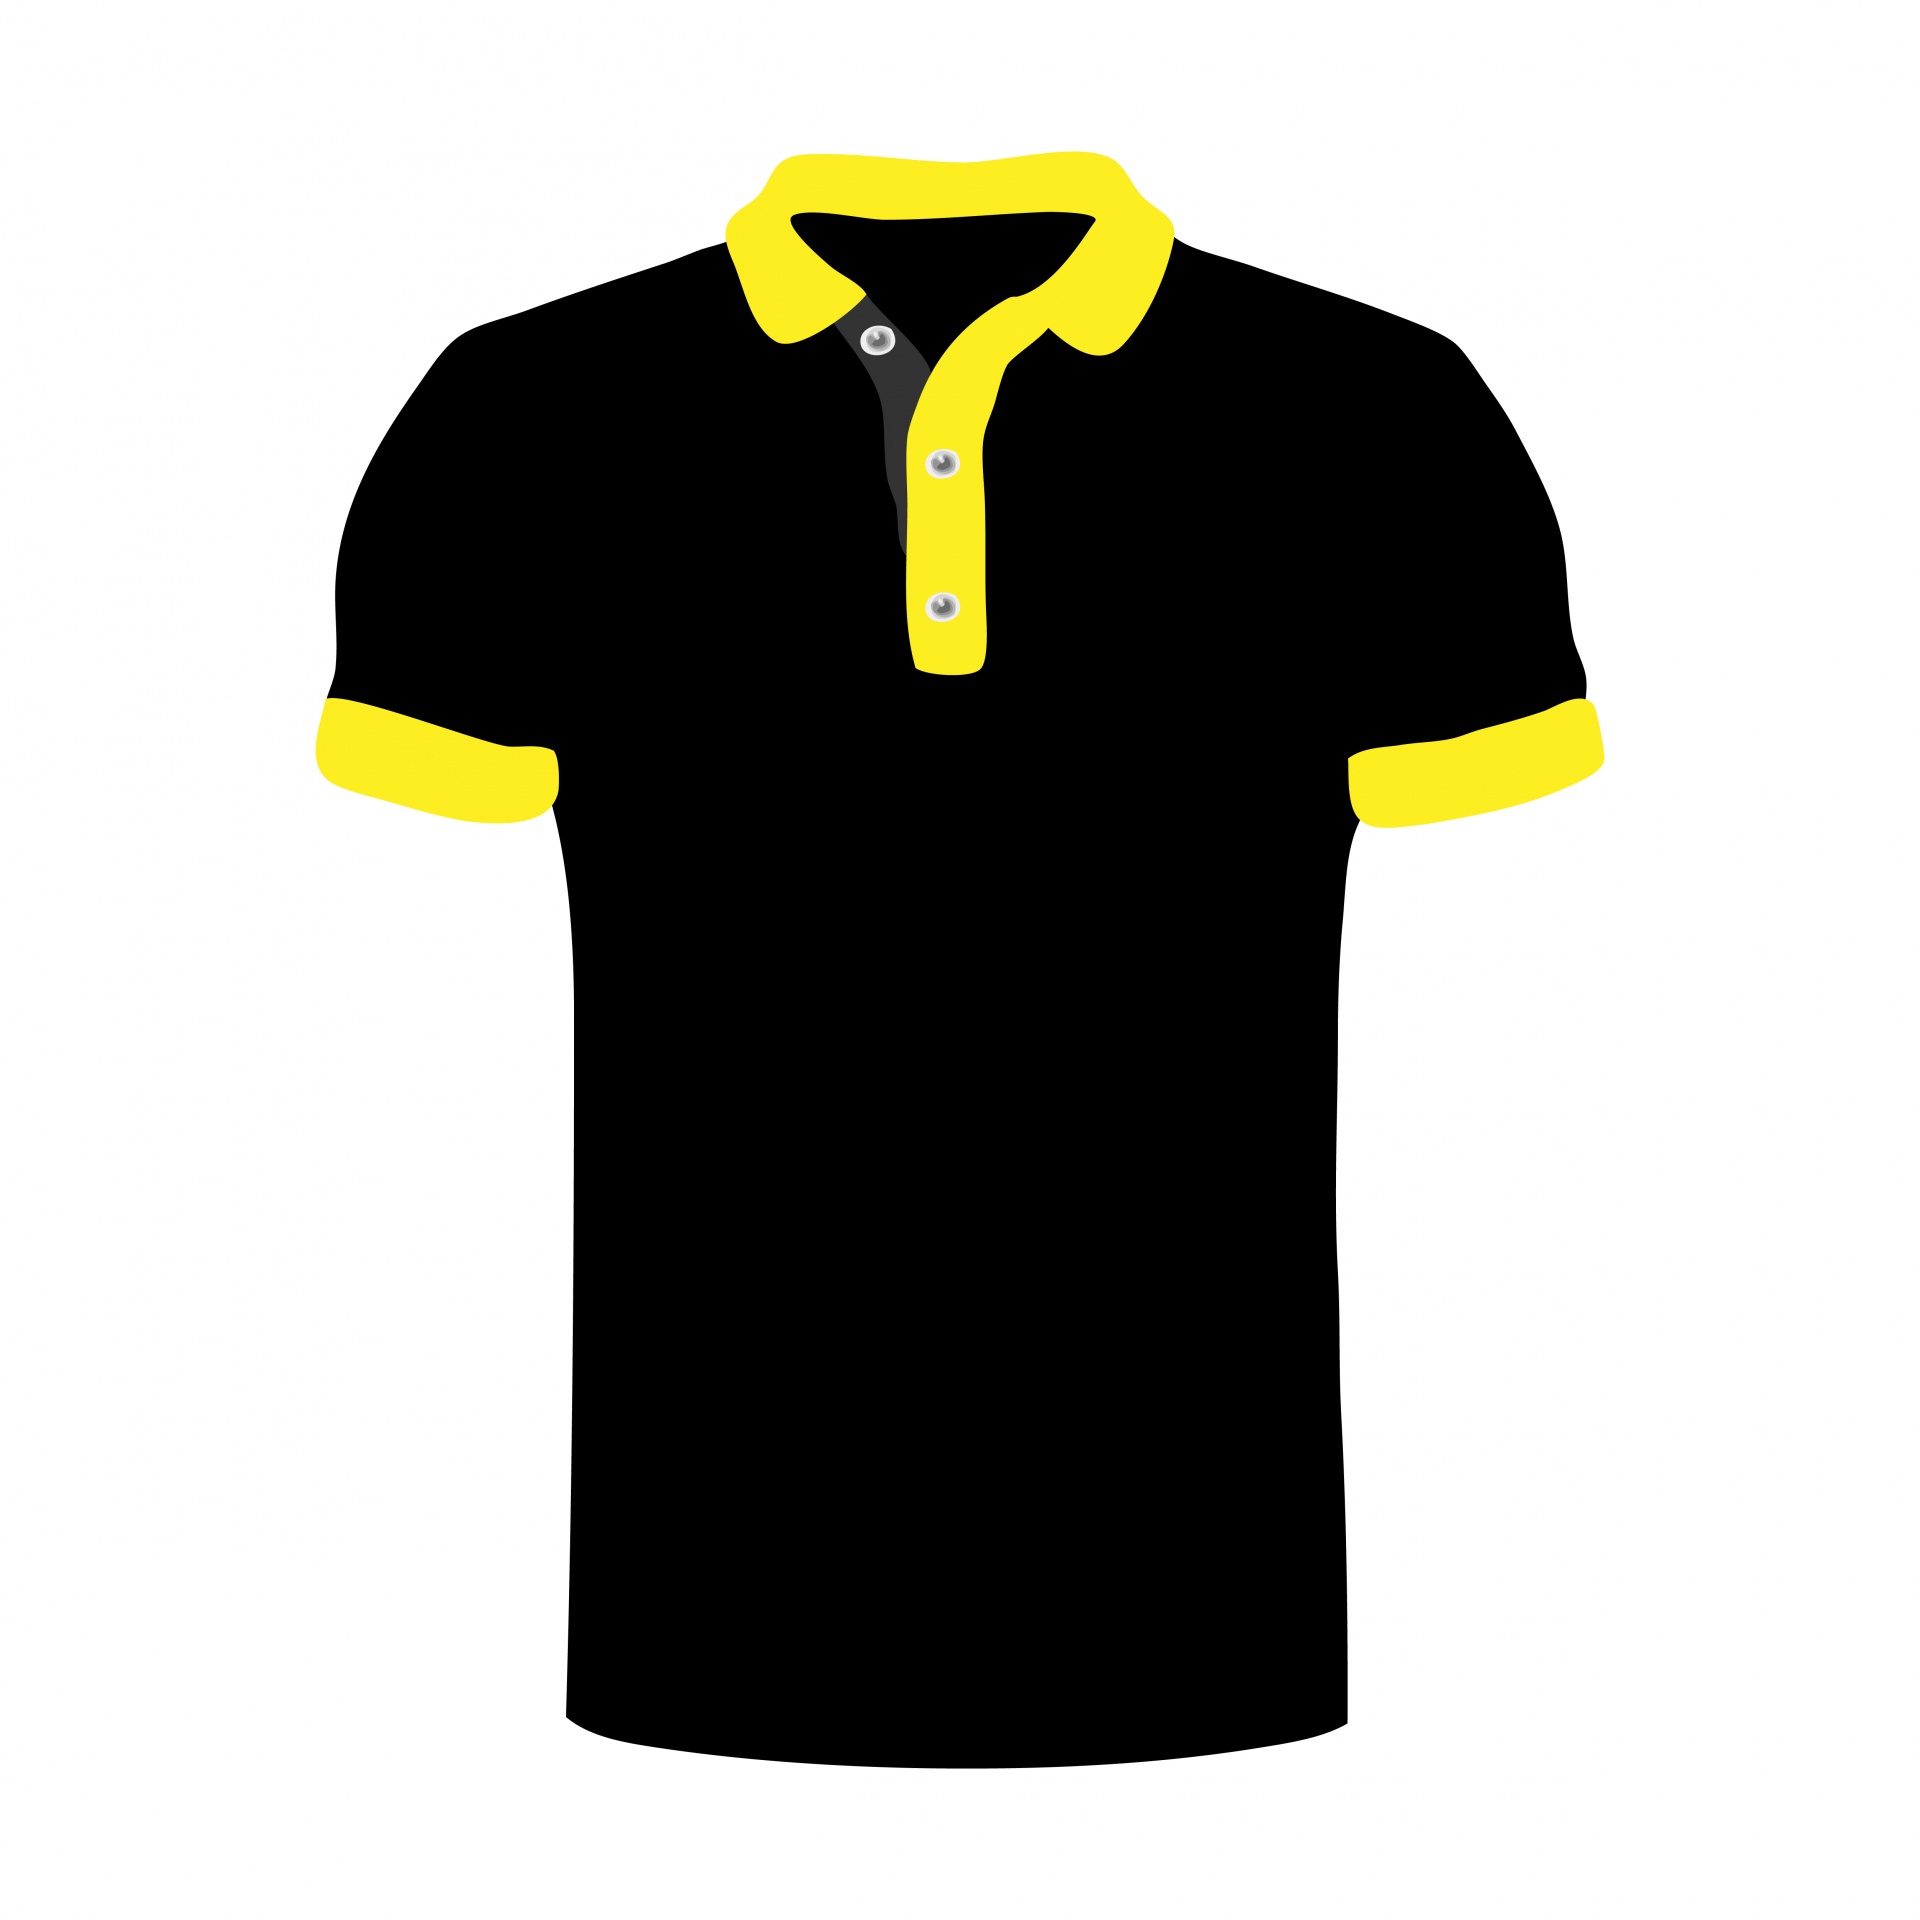 Black polo t-shirt with yellow trim